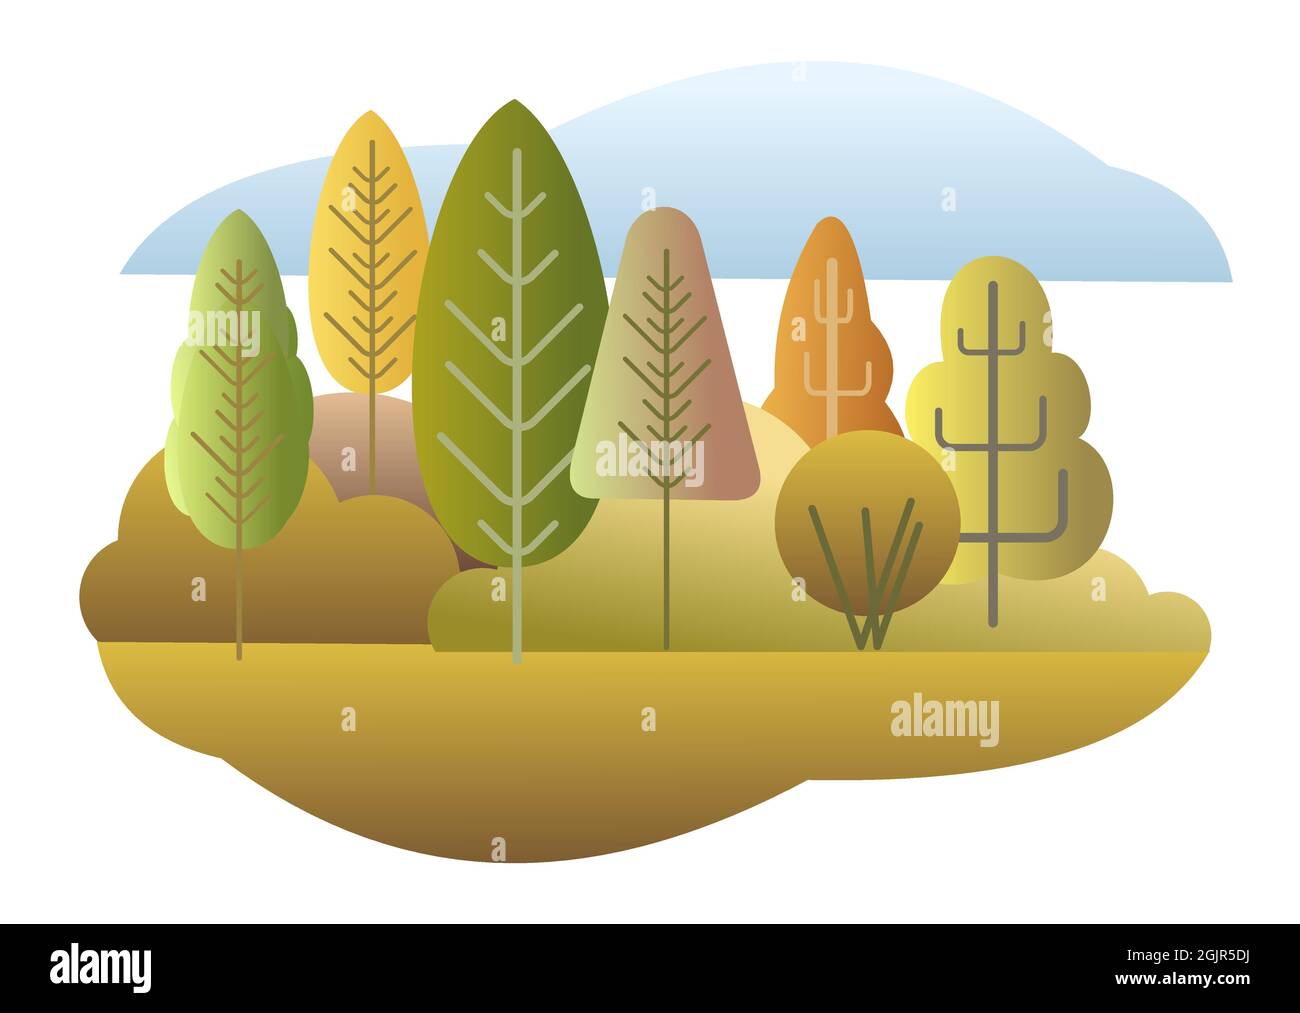 Autumn forest. Flat style symbolic illustration. Landscape in orange, yellow and green tones. Rural wildlife. Country scene with trees and sky Stock Vector